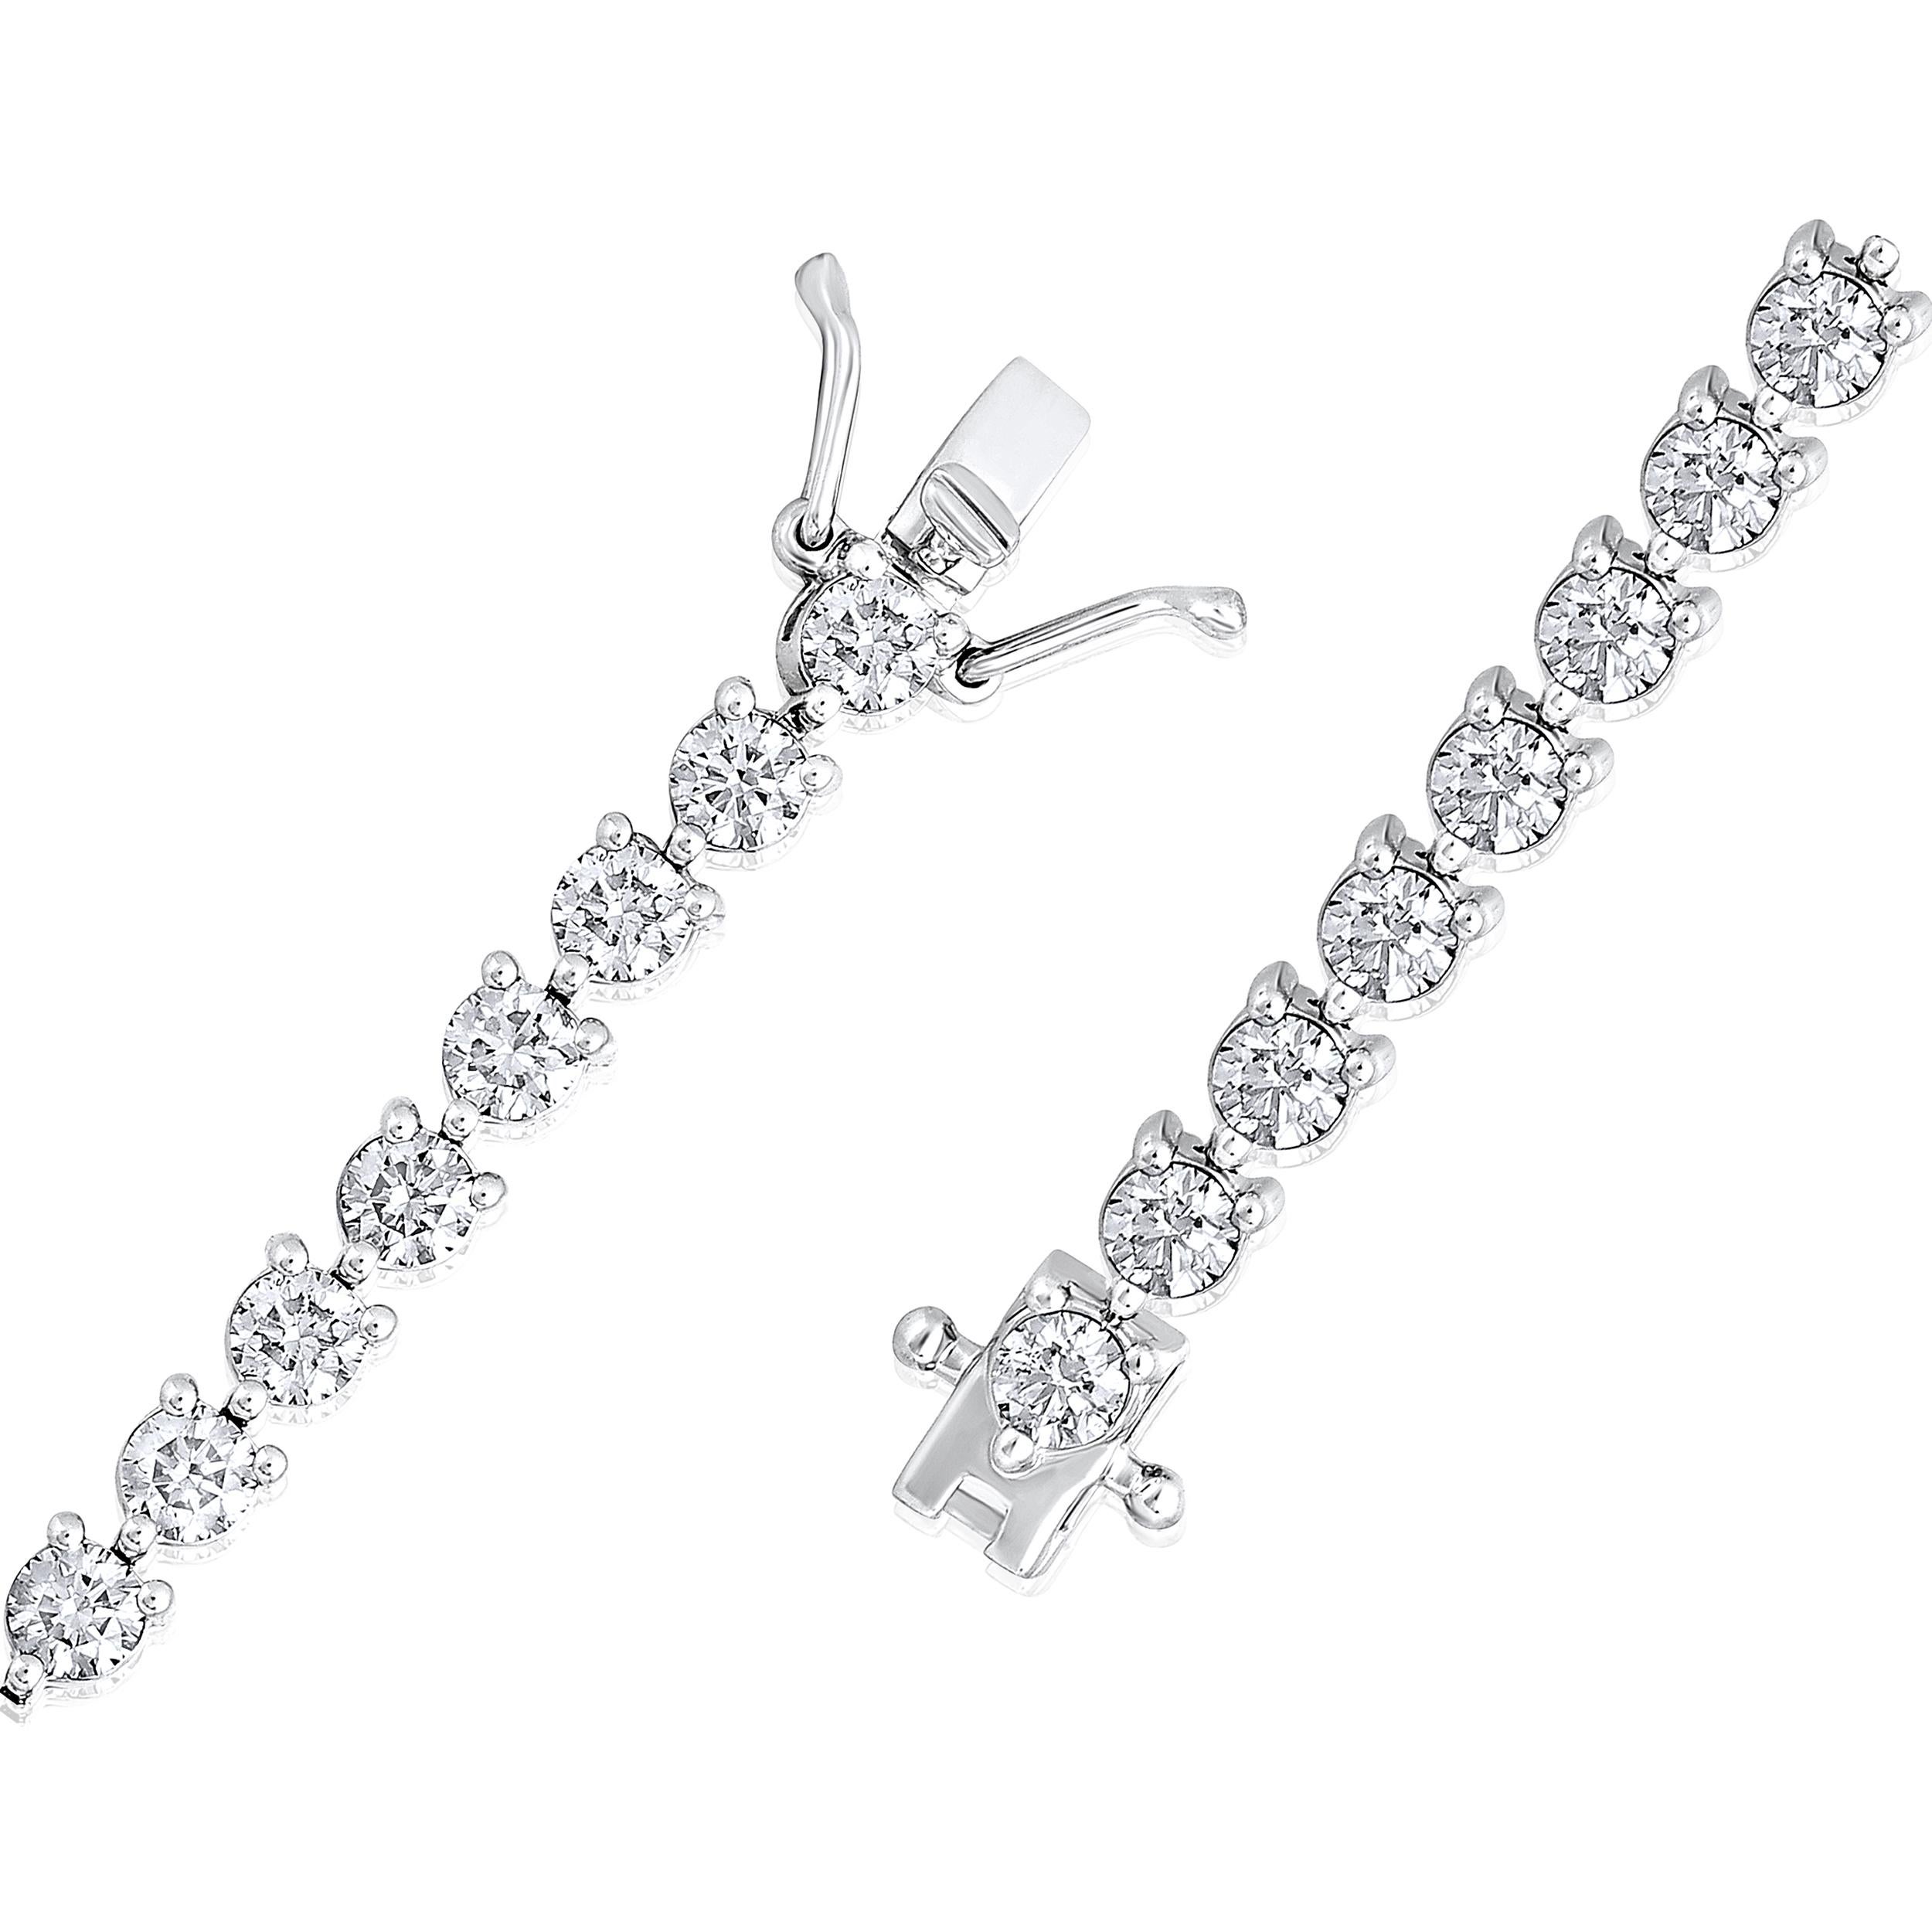 Crafted in 9.87 grams of 14K White Gold, the bracelet contains 43 stones of Round Diamonds with a total of 5.2 carat in G-H color and VS-SI carat. The bracelet length is 7 inches.

CONTEMPORARY AND TIMELESS ESSENCE: Crafted in 14-karat/18-karat with